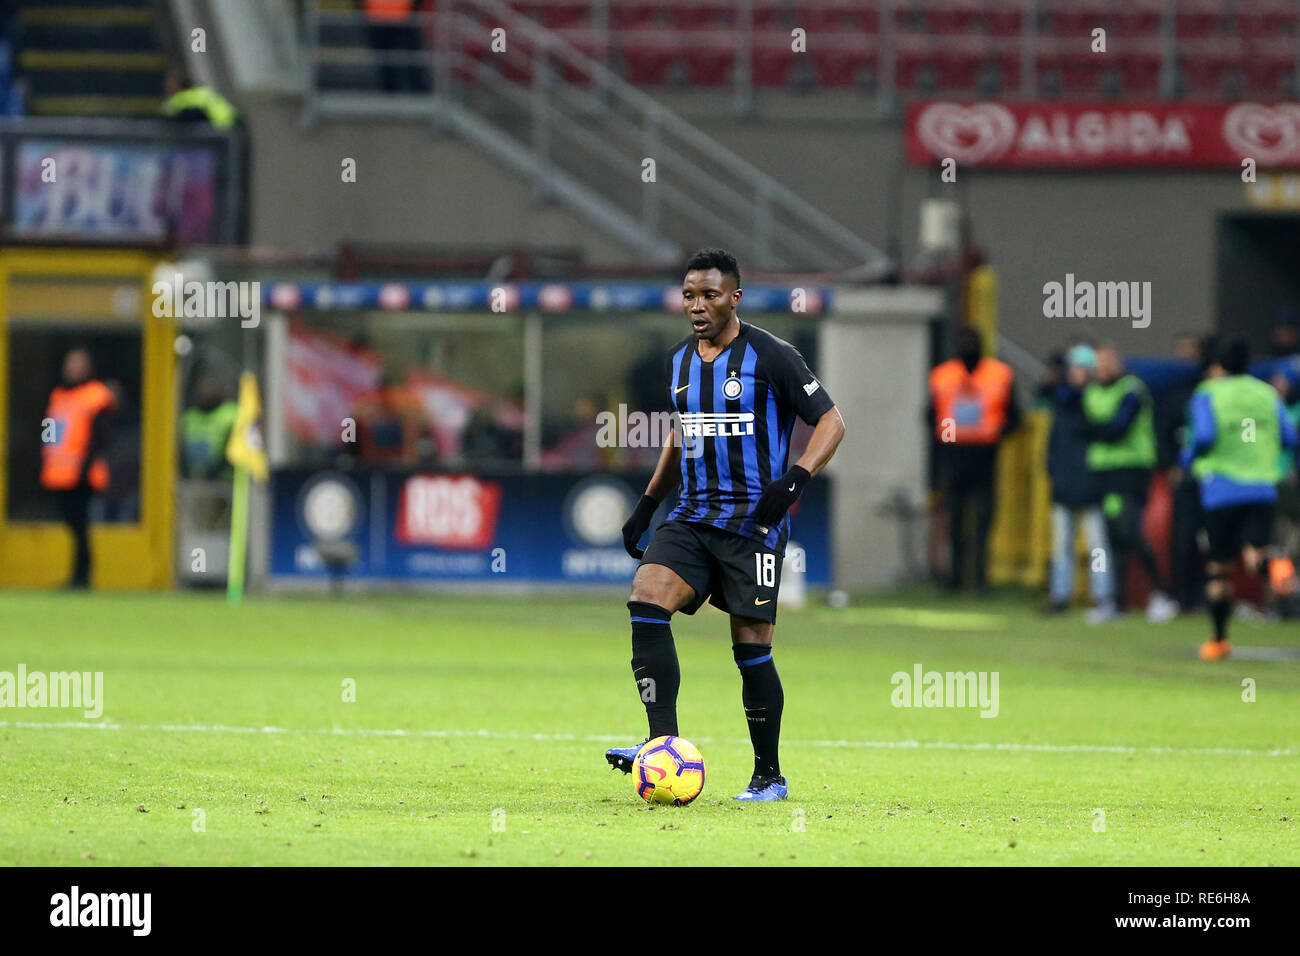 Milan, Italy. 19th January 2019.  Kwadwo Asamoah of FC Internazionale in action during the Serie A match between FC Internazionale and Us Sassuolo Calcio. Credit: Marco Canoniero/Alamy Live News Stock Photo